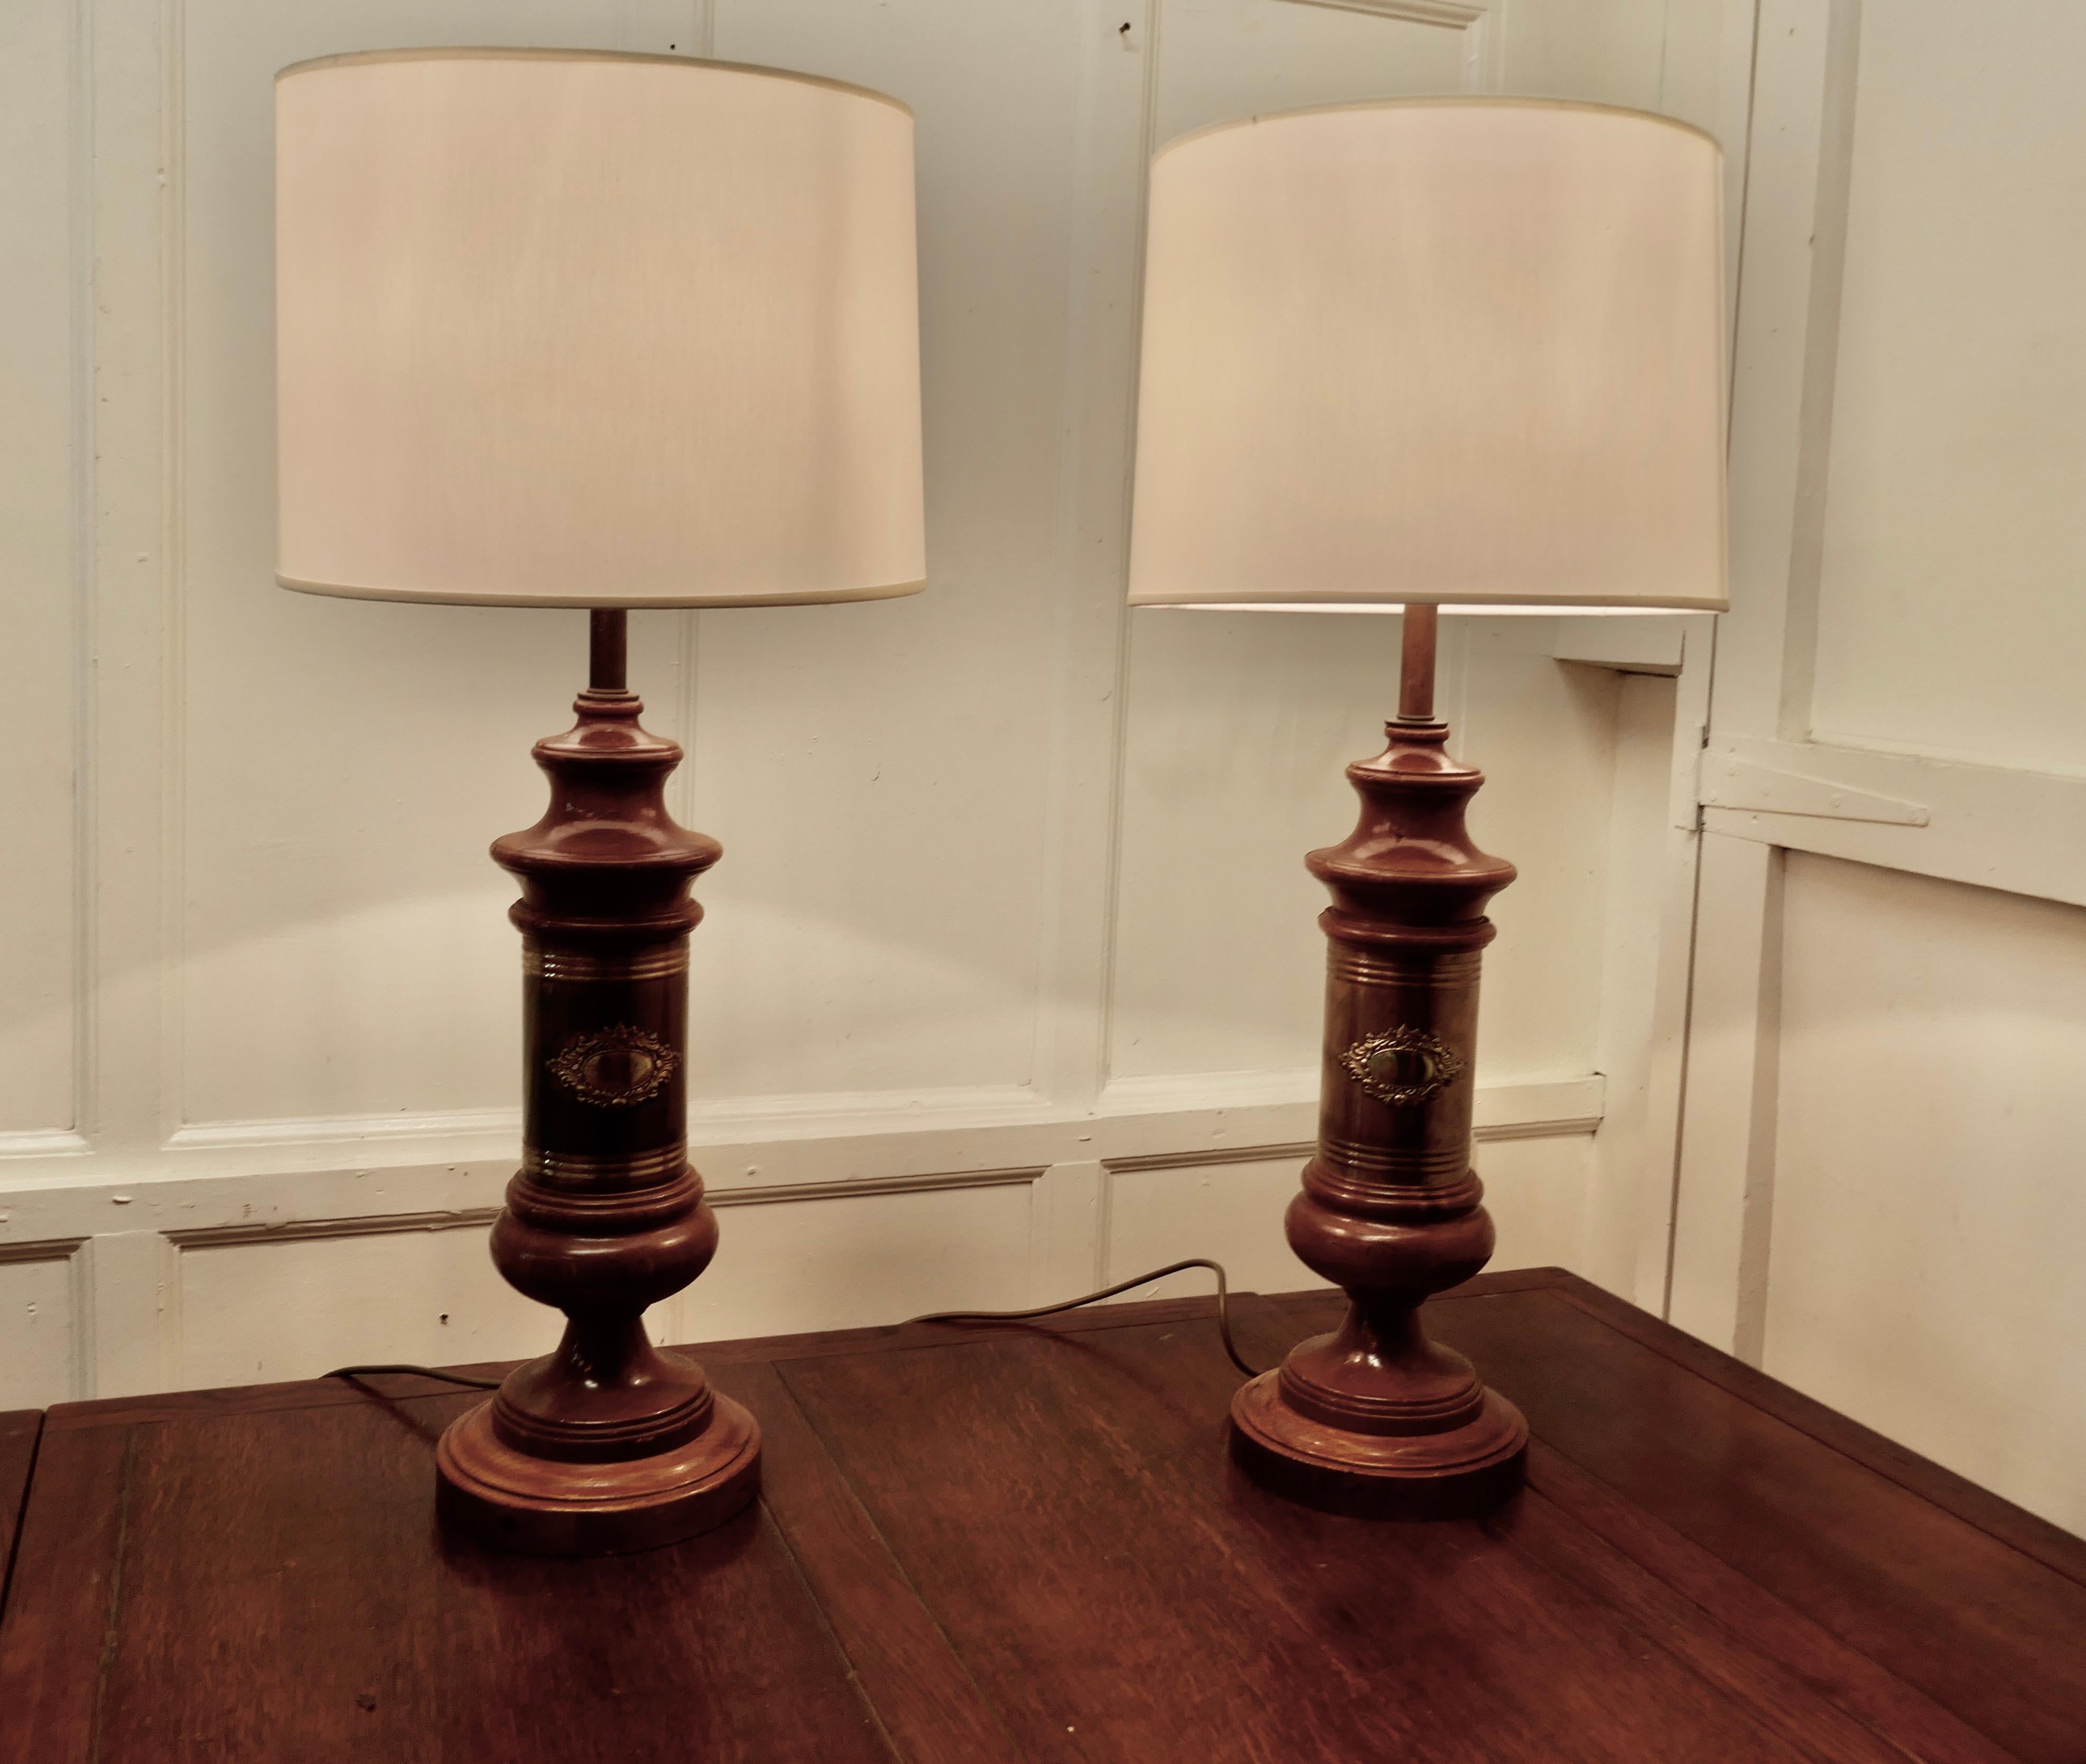 Pair of tall Art Deco style column table lamps

These are a very stylish pair of column lamps
The main columns are in walnut and they each have a presentation plaque on the front, these have not been engraved
These very tall lamps come with